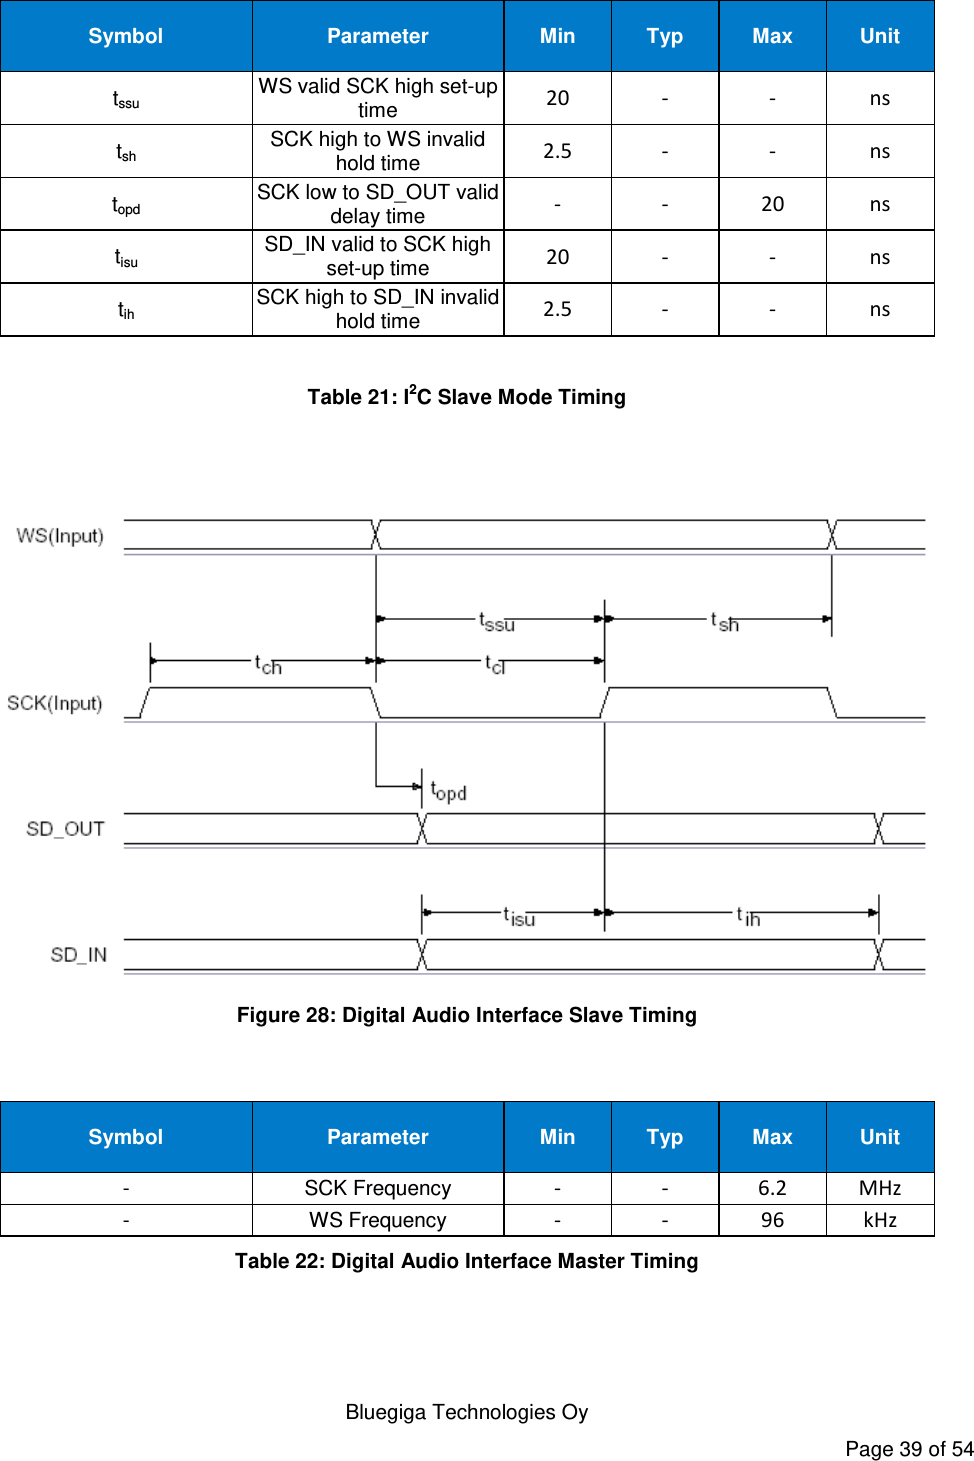    Bluegiga Technologies Oy Page 39 of 54 Symbol Parameter Min Typ Max Unit tssu WS valid SCK high set-up time 20 - - ns tsh SCK high to WS invalid hold time 2.5 - - ns topd SCK low to SD_OUT valid delay time - - 20 ns tisu SD_IN valid to SCK high set-up time 20 - - ns tih SCK high to SD_IN invalid hold time 2.5 - - ns  Table 21: I2C Slave Mode Timing    Figure 28: Digital Audio Interface Slave Timing   Symbol Parameter Min Typ Max Unit - SCK Frequency - - 6.2 MHz - WS Frequency - - 96 kHz Table 22: Digital Audio Interface Master Timing   